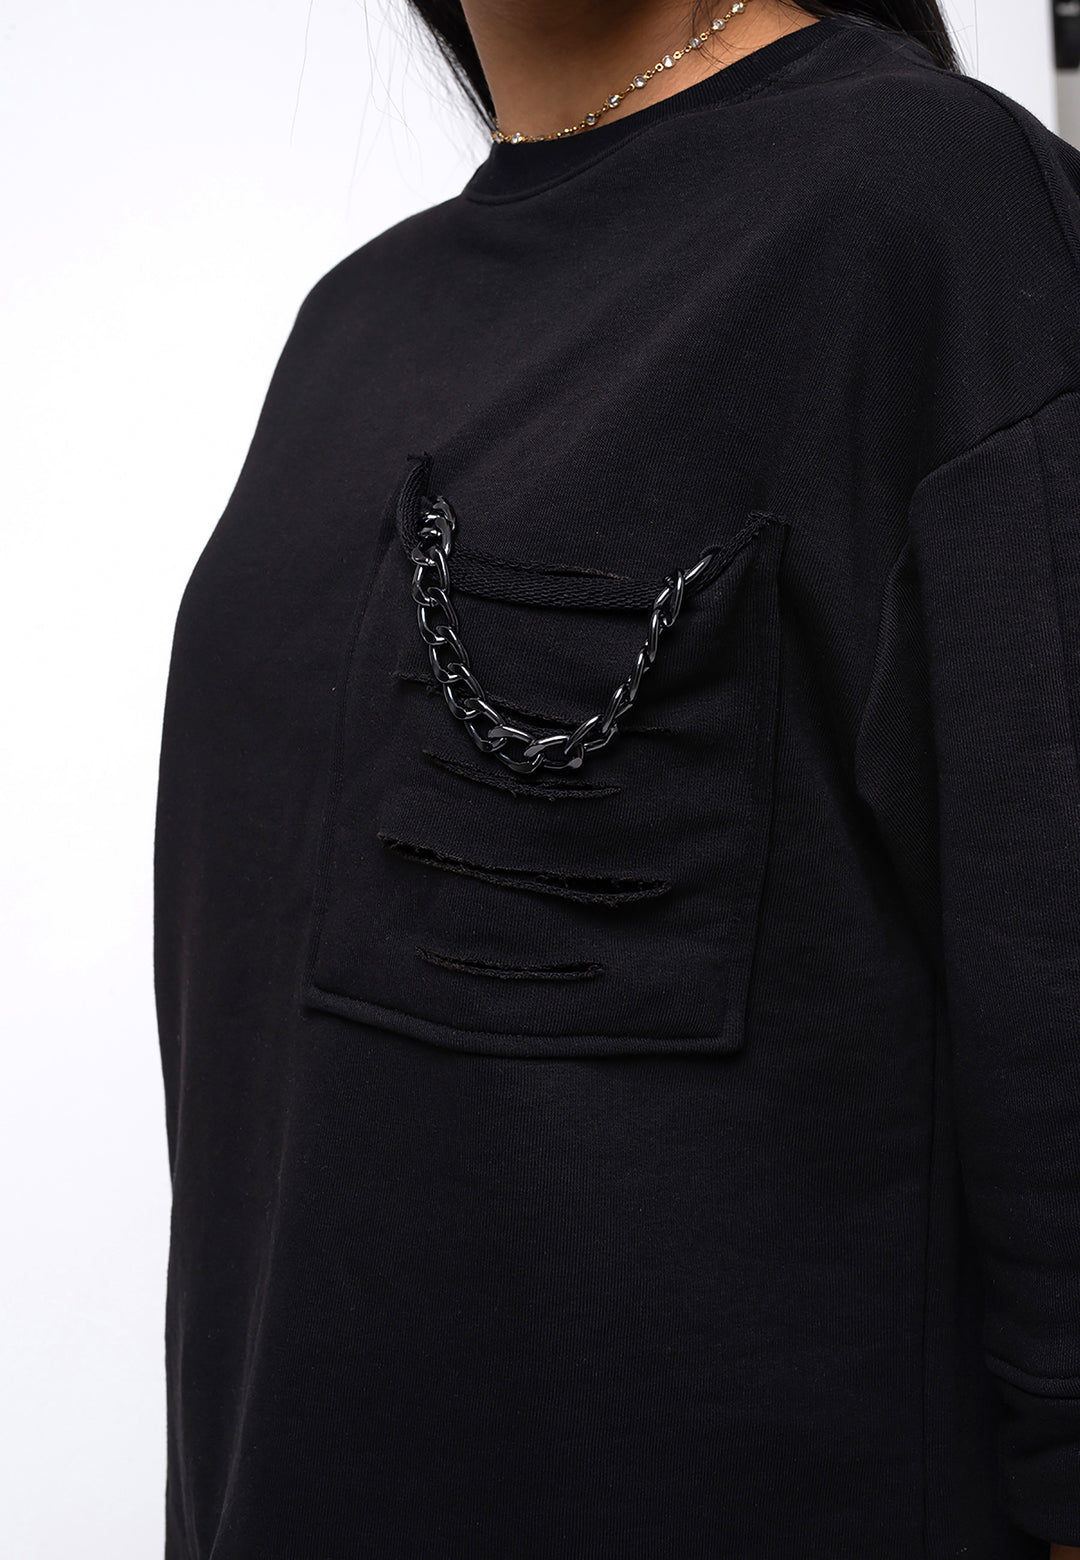 'Chain' Tracksuit